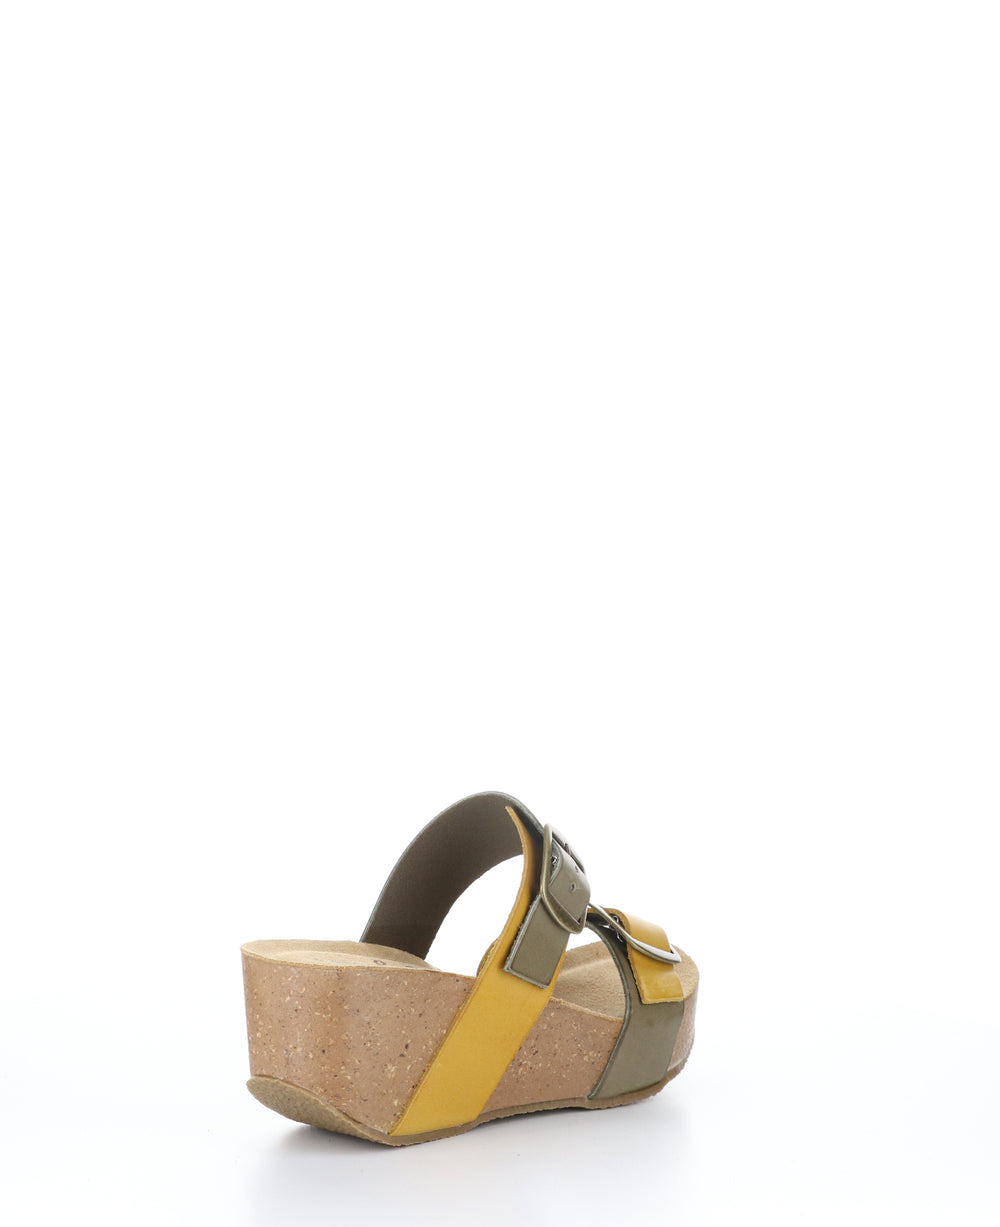 LAWT FANGO TAUPE/YELLOW Wedge Sandals|LAWT Mules Compensées in Beige